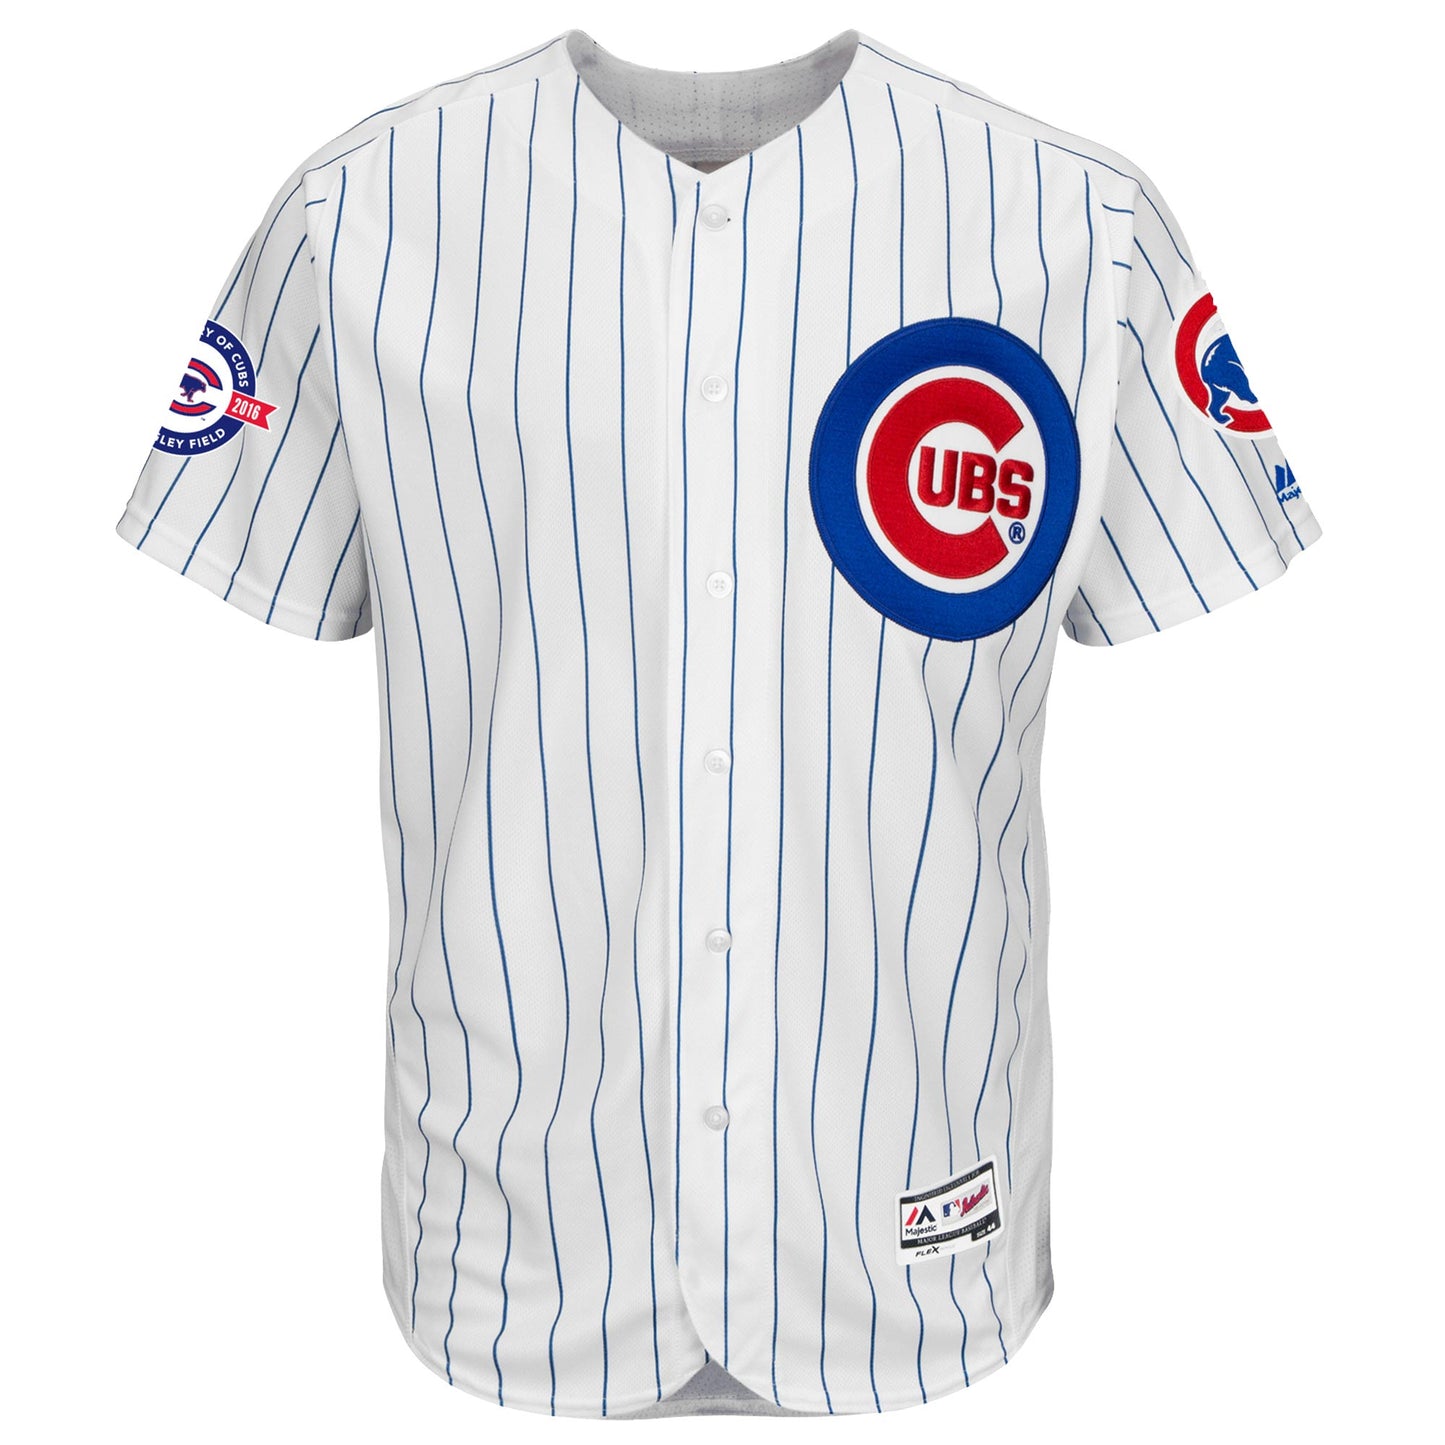 Chicago Cubs Jason Heyward Home Flexbase Authentic Jersey with 100 Years at Wrigley Field Commemorative Patch